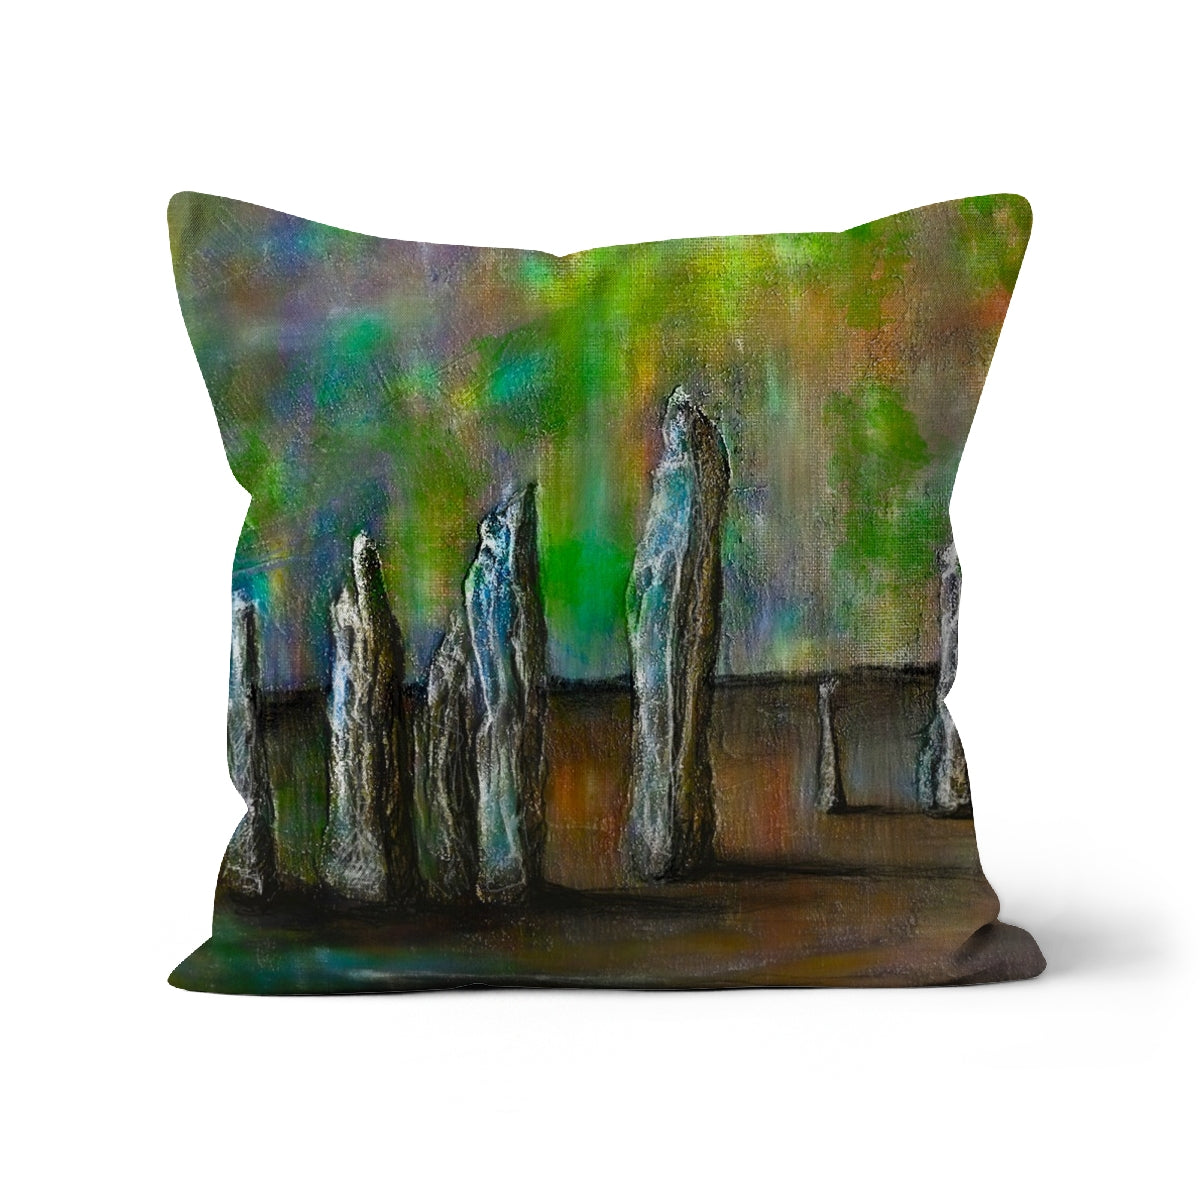 Callanish Northern Lights Art Gifts Cushion-Cushions-Hebridean Islands Art Gallery-Faux Suede-16"x16"-Paintings, Prints, Homeware, Art Gifts From Scotland By Scottish Artist Kevin Hunter